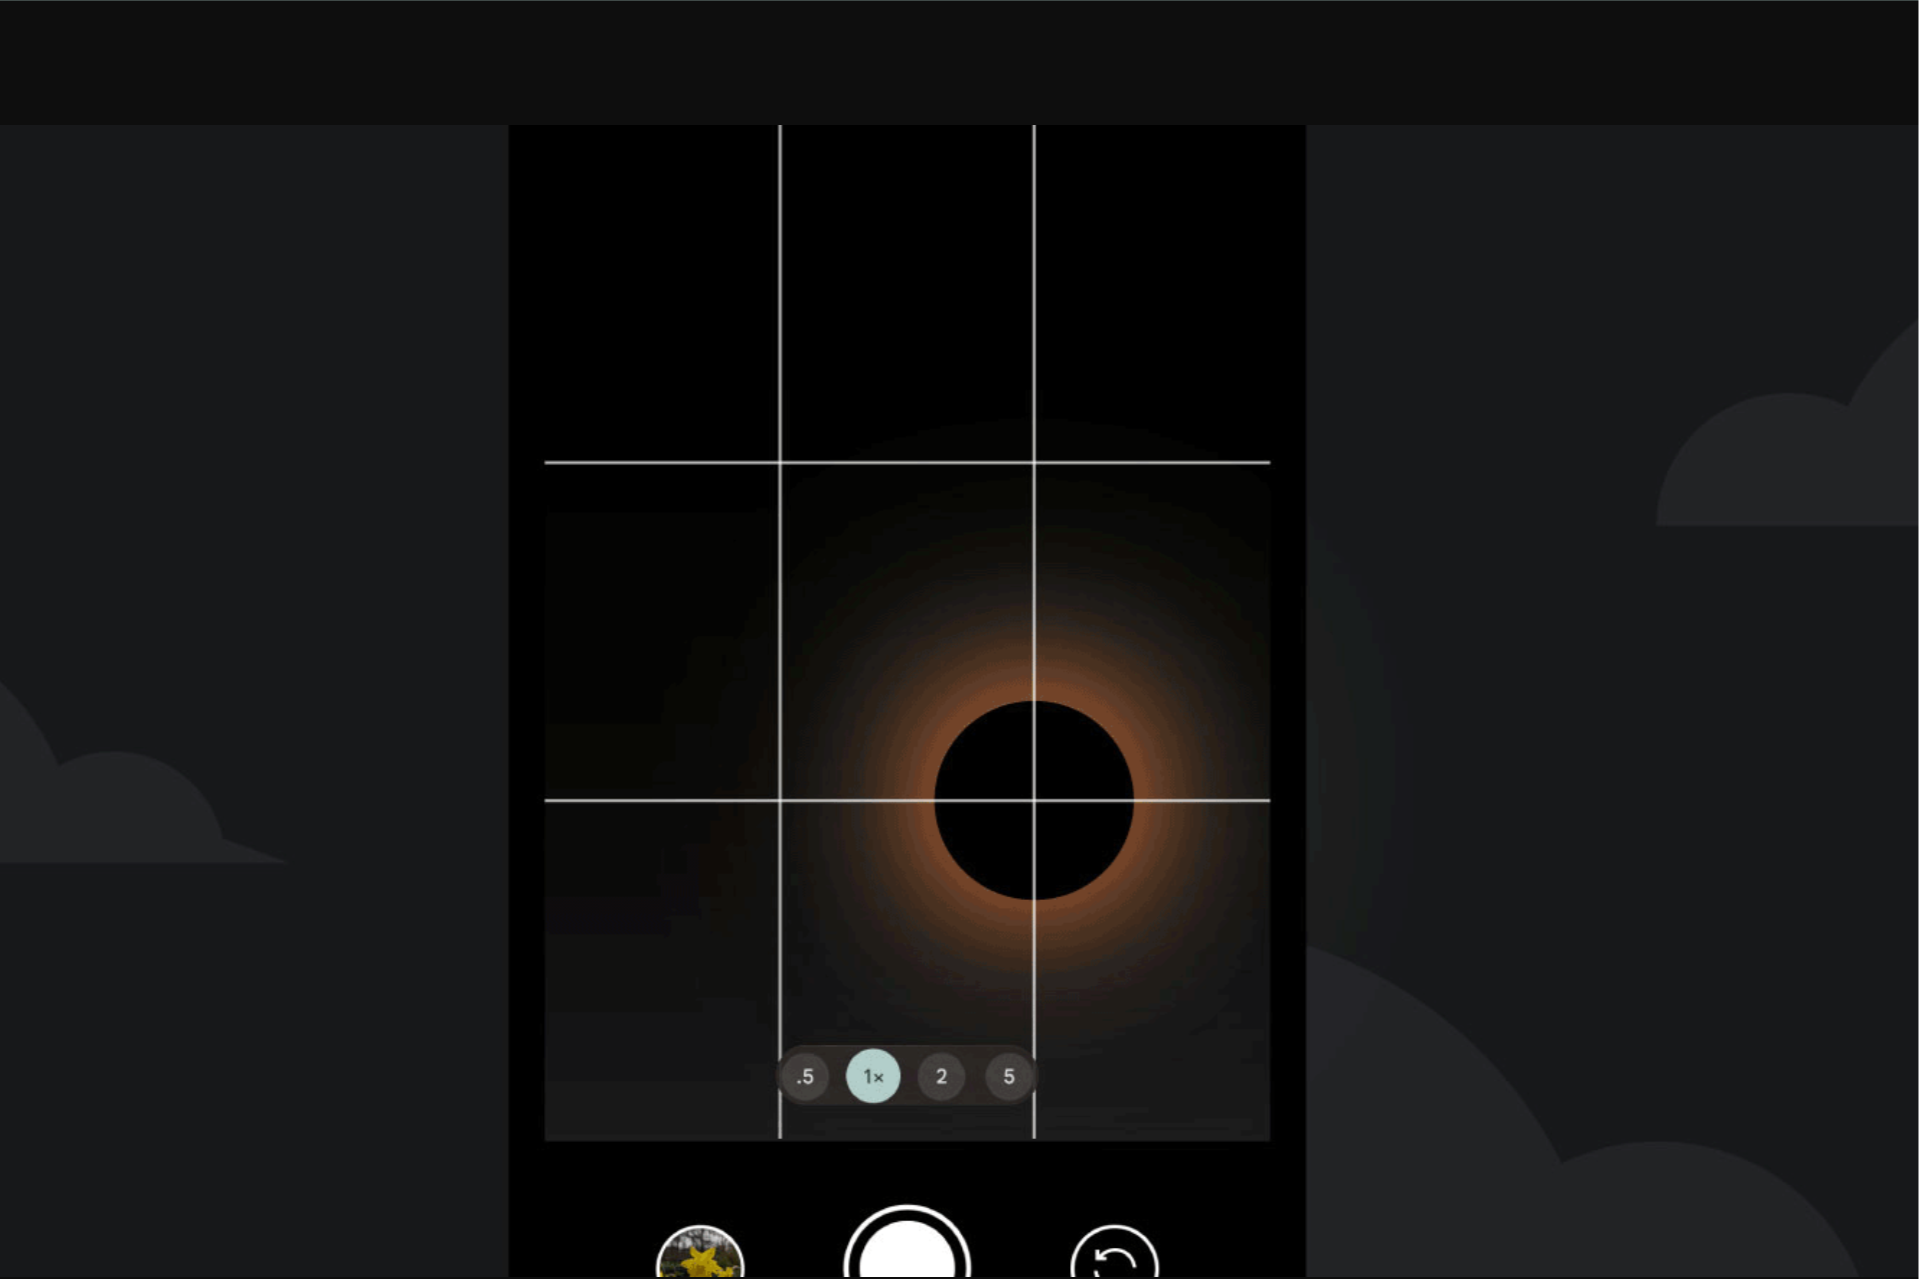 Image Credit–Google - Got a Pixel phone? Google advises how to shoot the perfect photos of the April 8 total solar eclipse